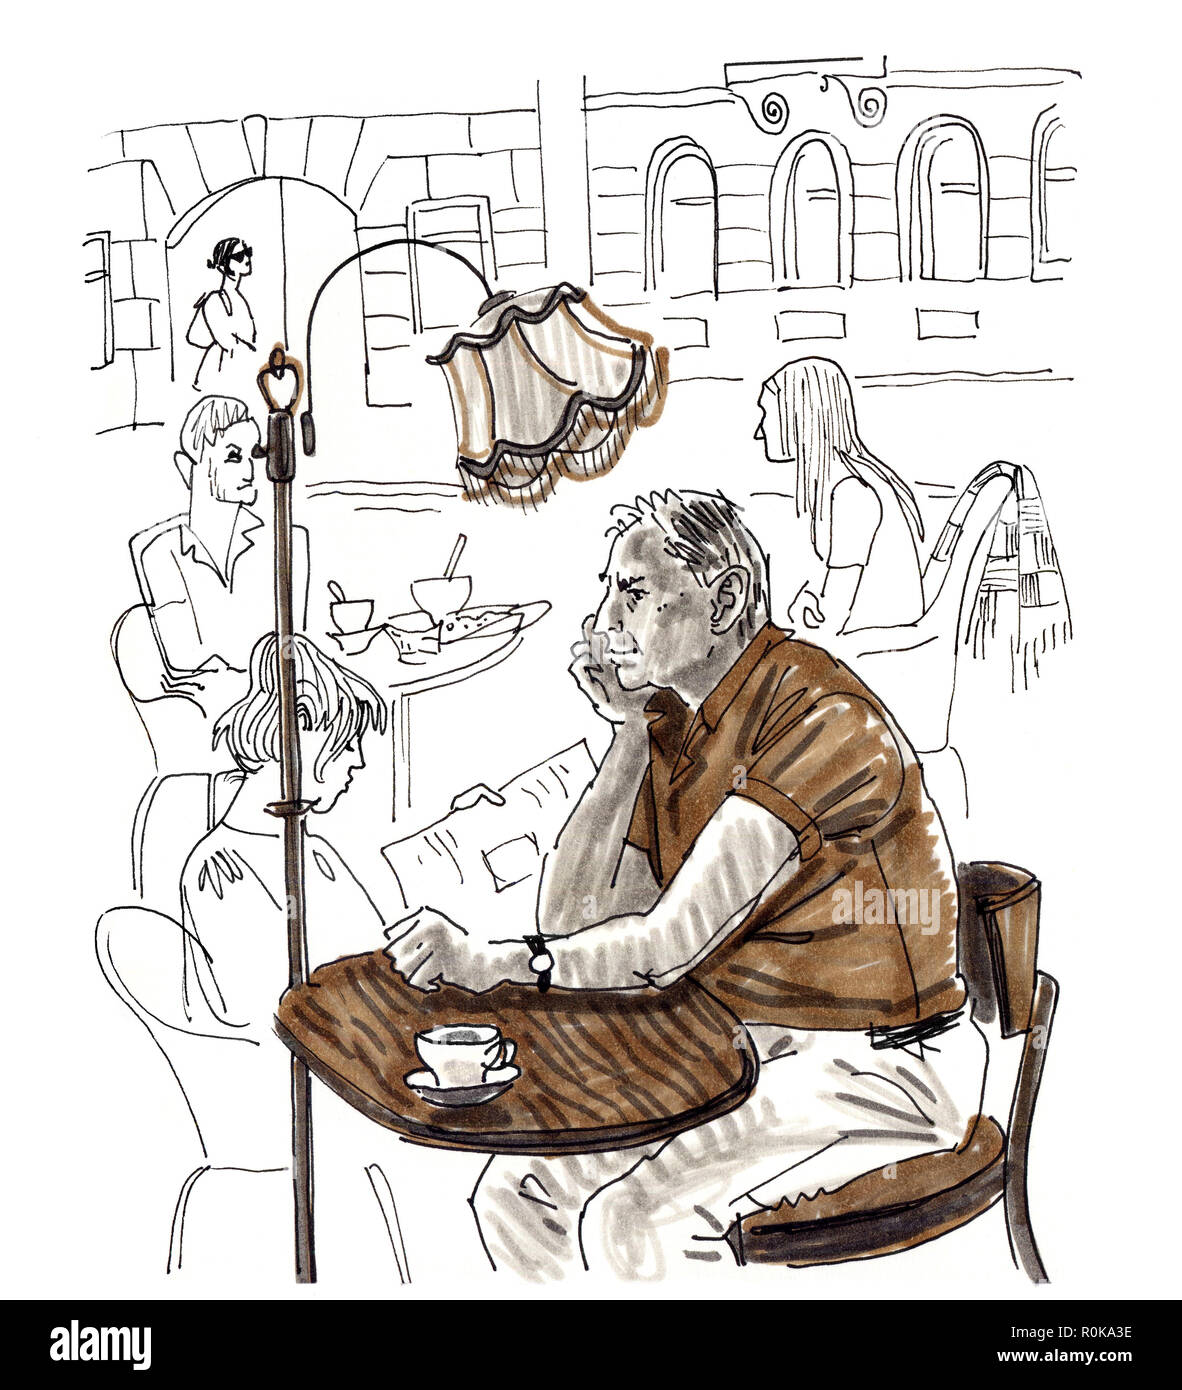 An elderly man sits at a table with a cup of coffee under a retro floor lamp in a restaurant by the window with a view the city. Hand drawn sketchy style marker pen illustration on a white background. Stock Photo